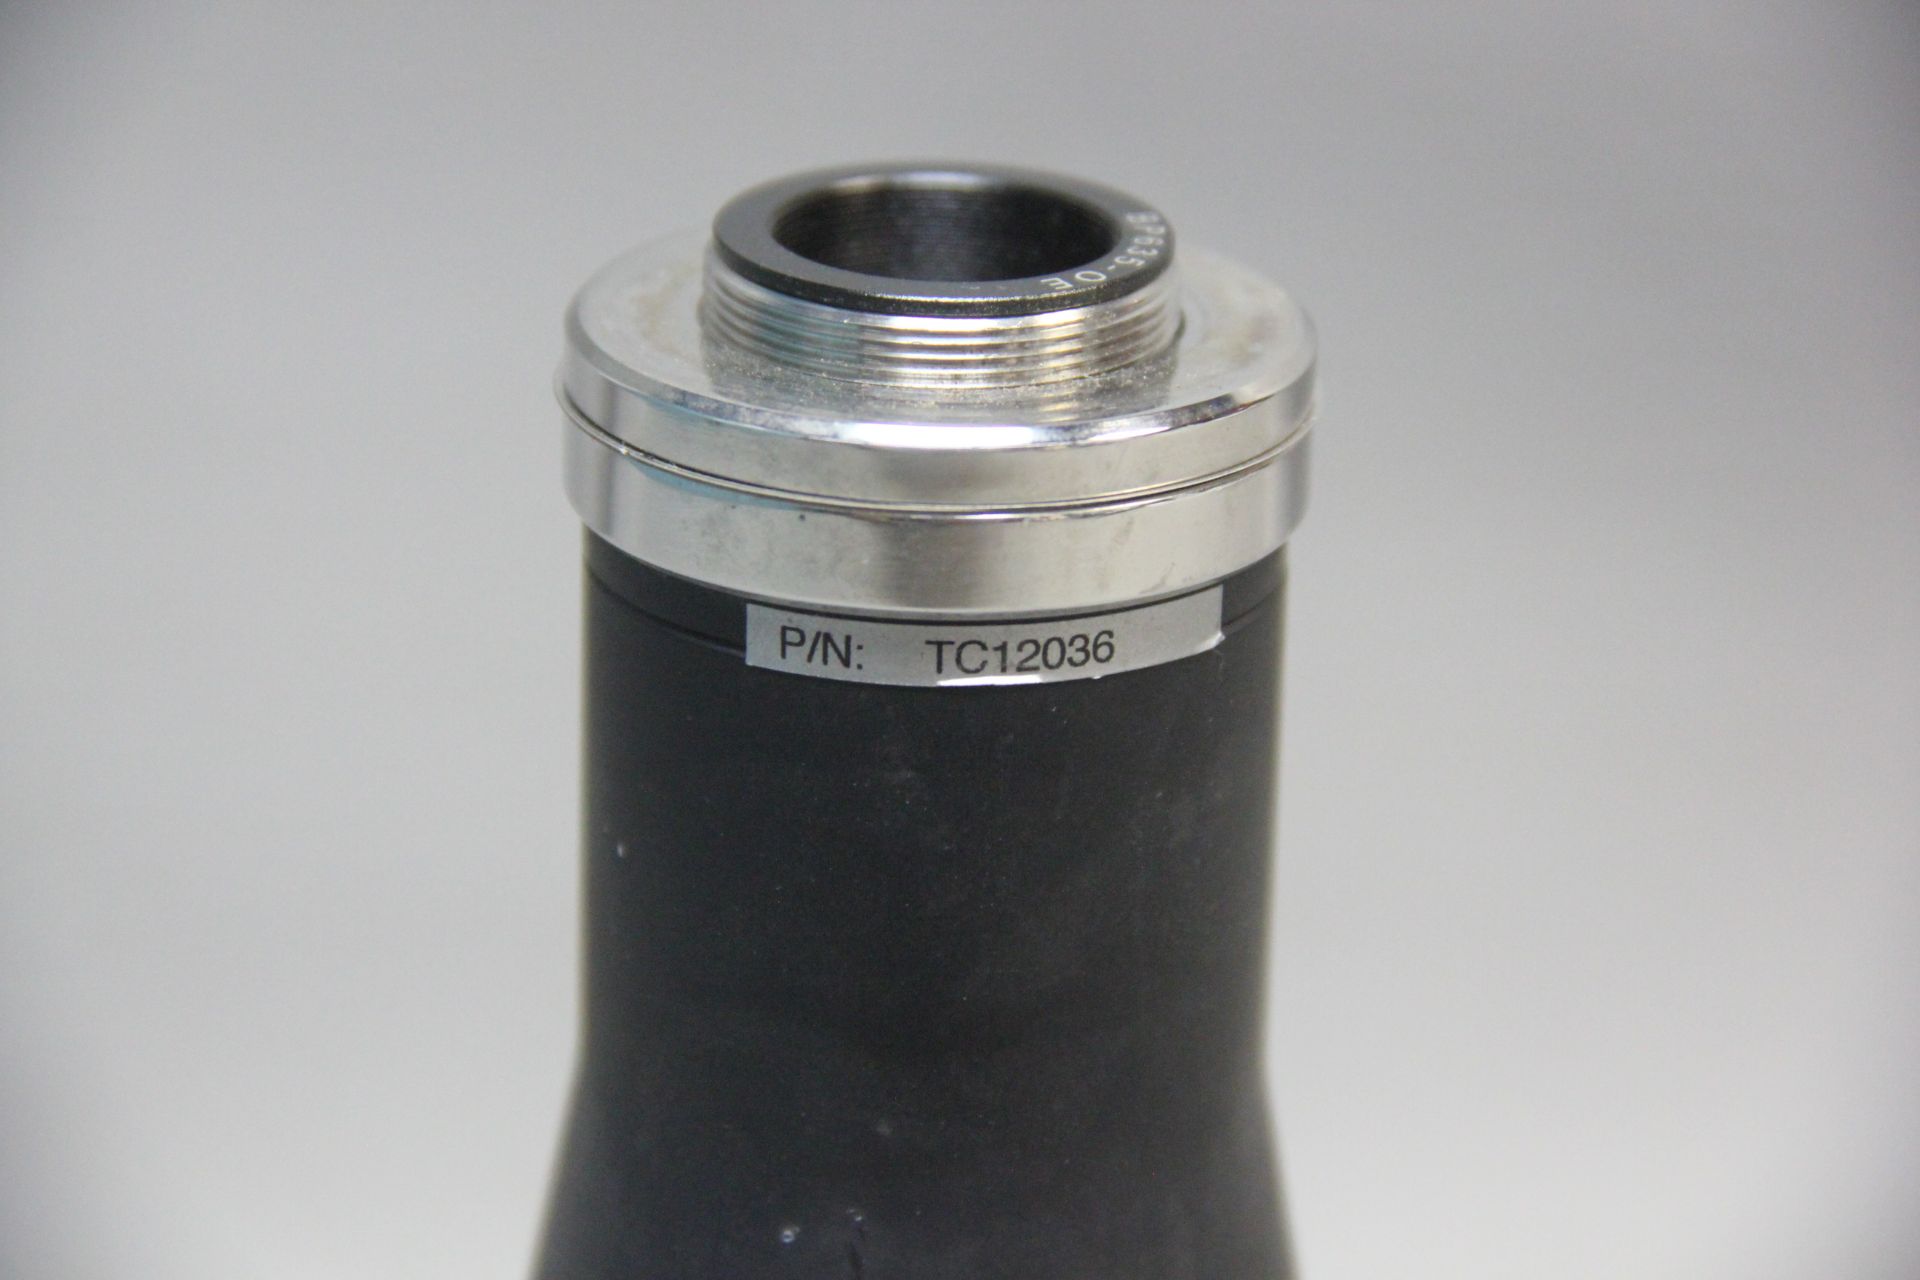 3 OPTO ENGINEERING TELECENTRIC LENSES - Image 6 of 6